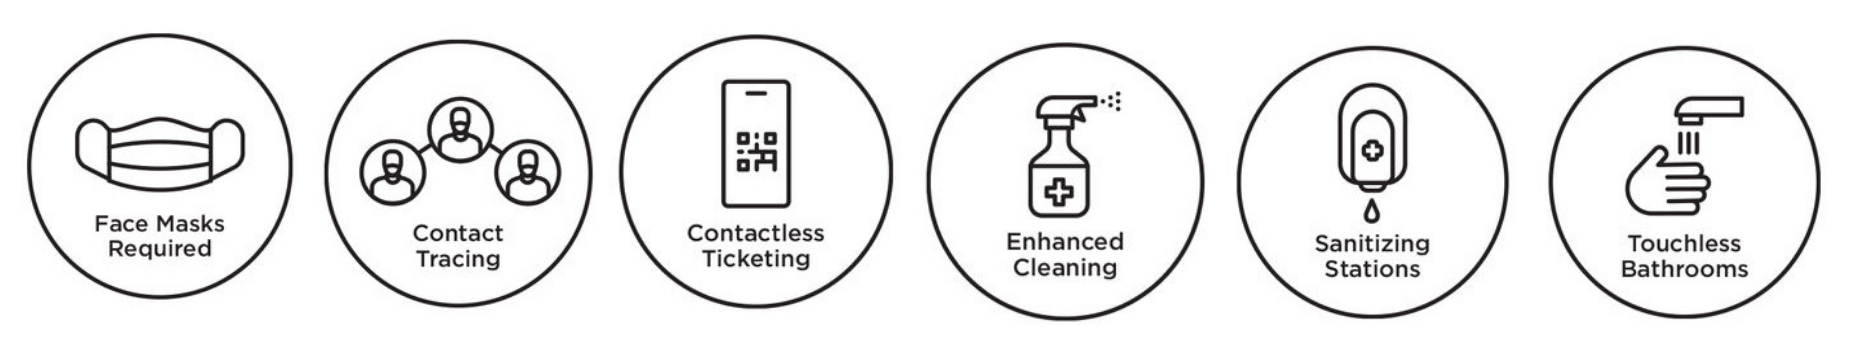 COVID-19 Safety Icons for masks required, contactless ticketing, enhanced cleaning, sanitizing stations